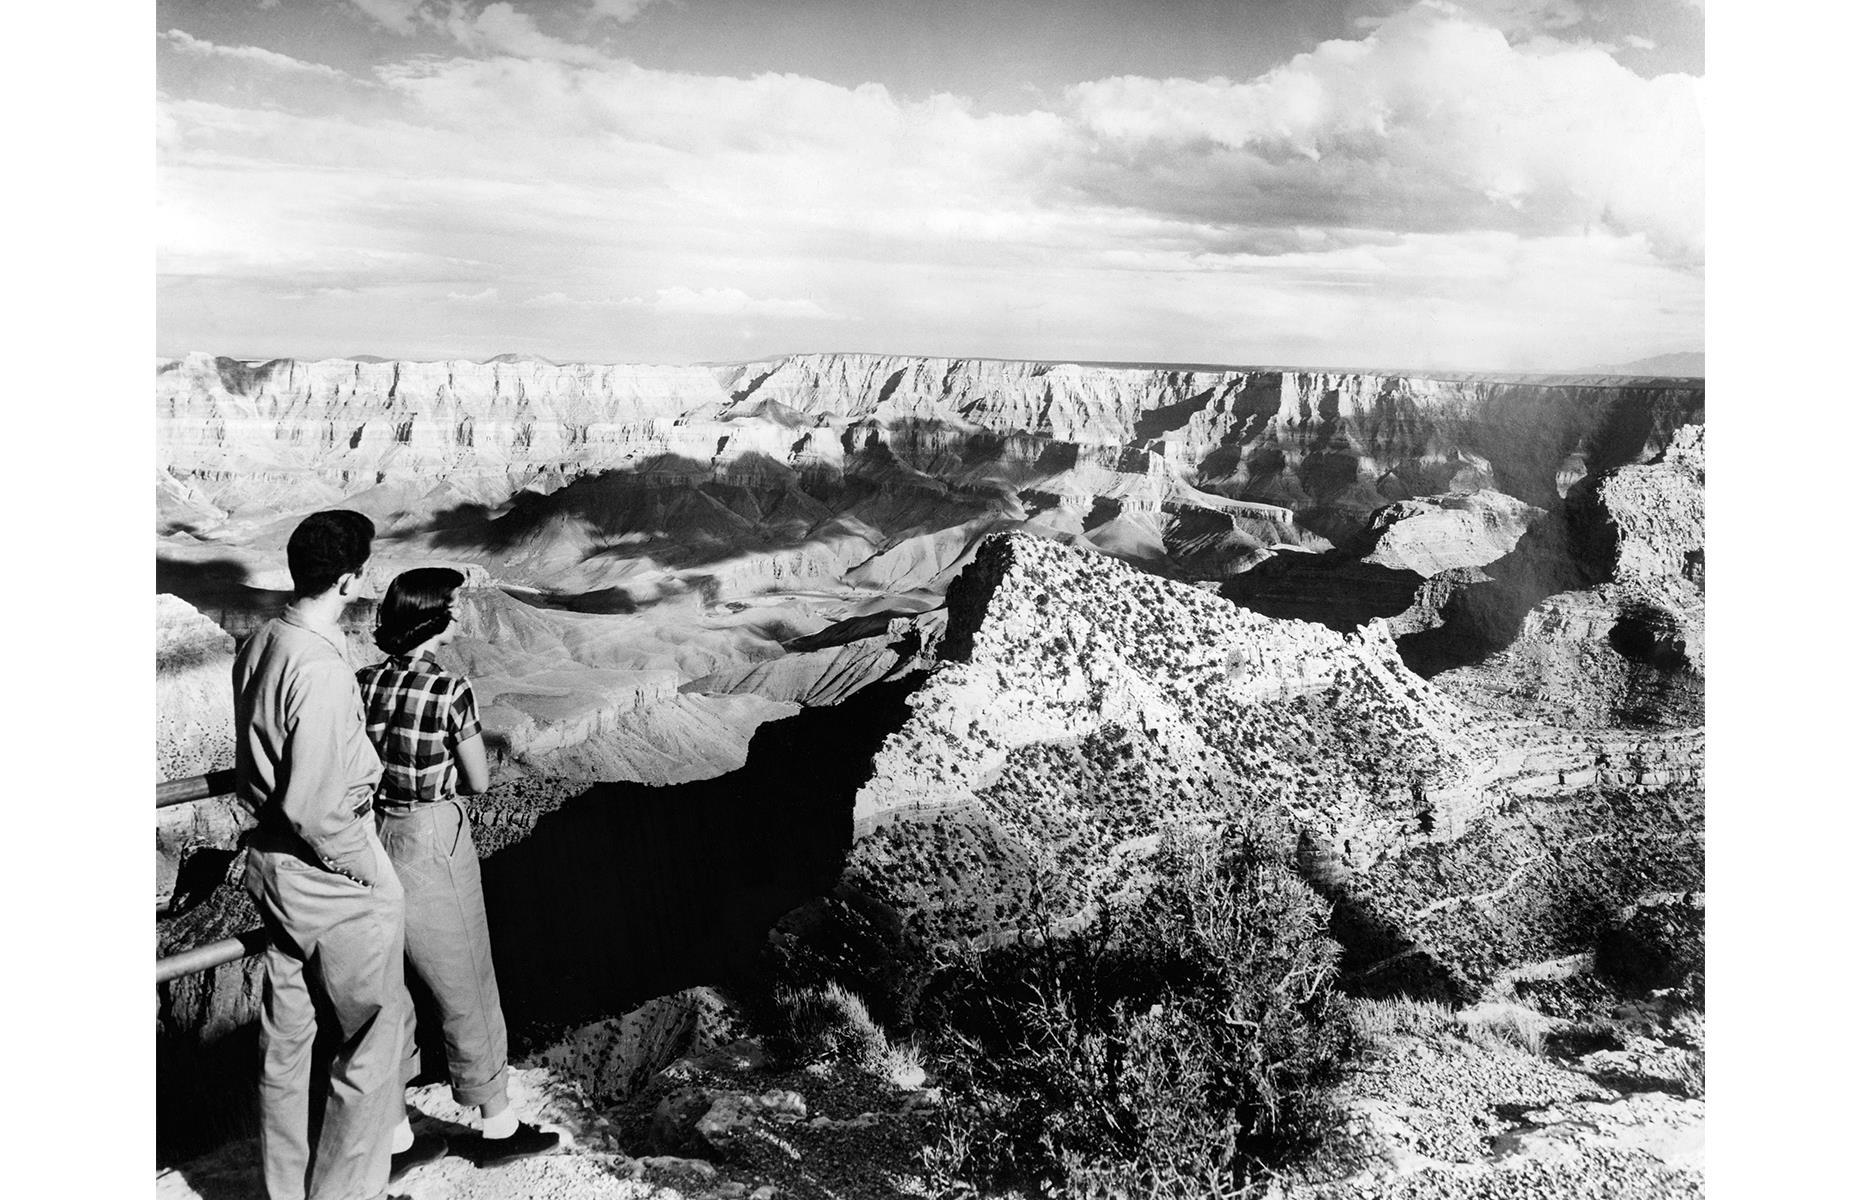 Farther south, the Grand Canyon has been a top road-trip pitstop for decades, drawing vacationers in their droves come summer. This couple stand on a scenic overlook and gaze out in awe as the spectacular rocks roll out beneath them. The photo dates to the 1940s.